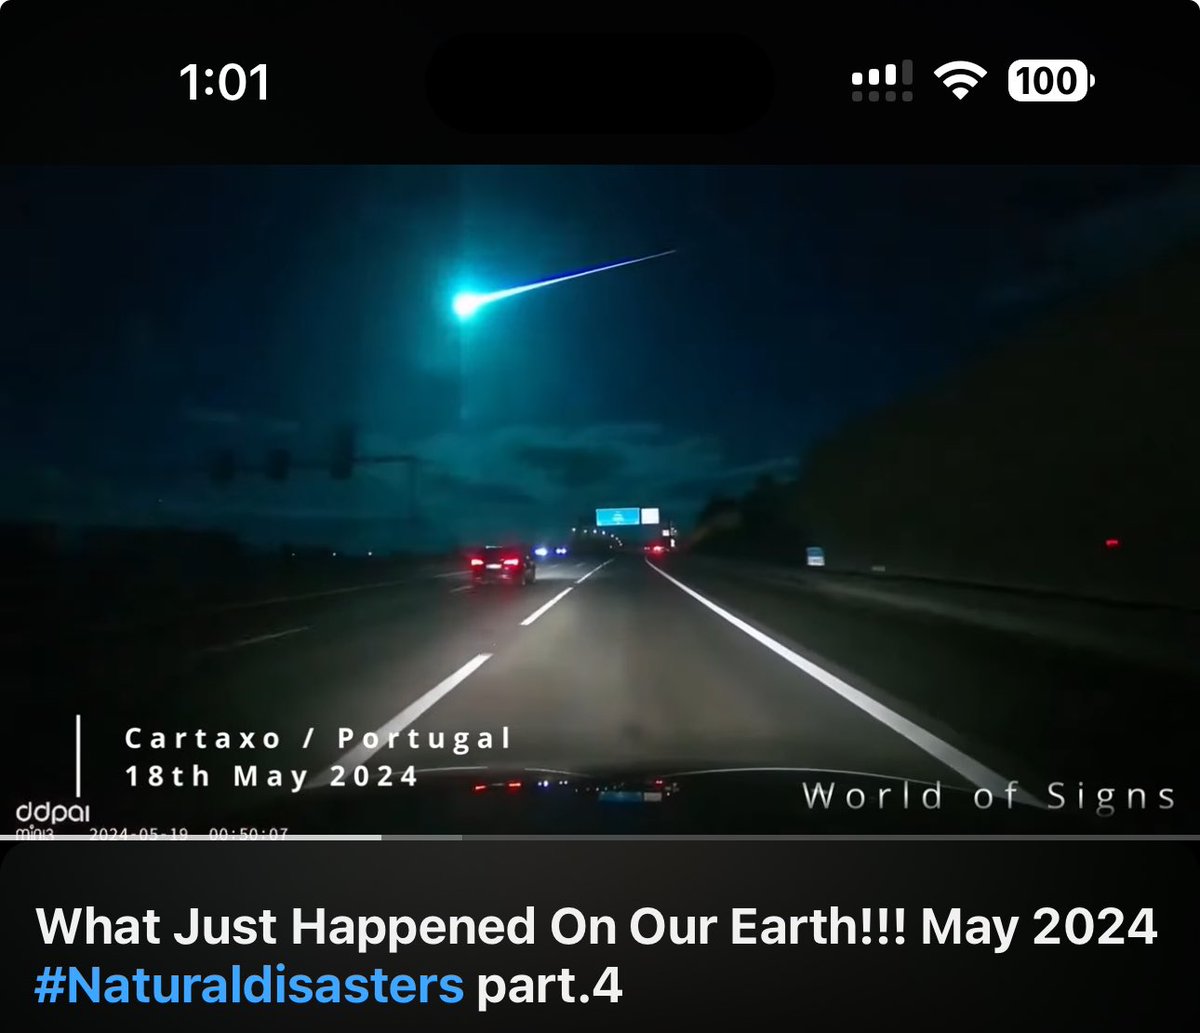 What Just Happened On Our Earth!!! May 2024 #Naturaldisasters part.4 youtu.be/3CgjggvmczM?fe… via @YouTube